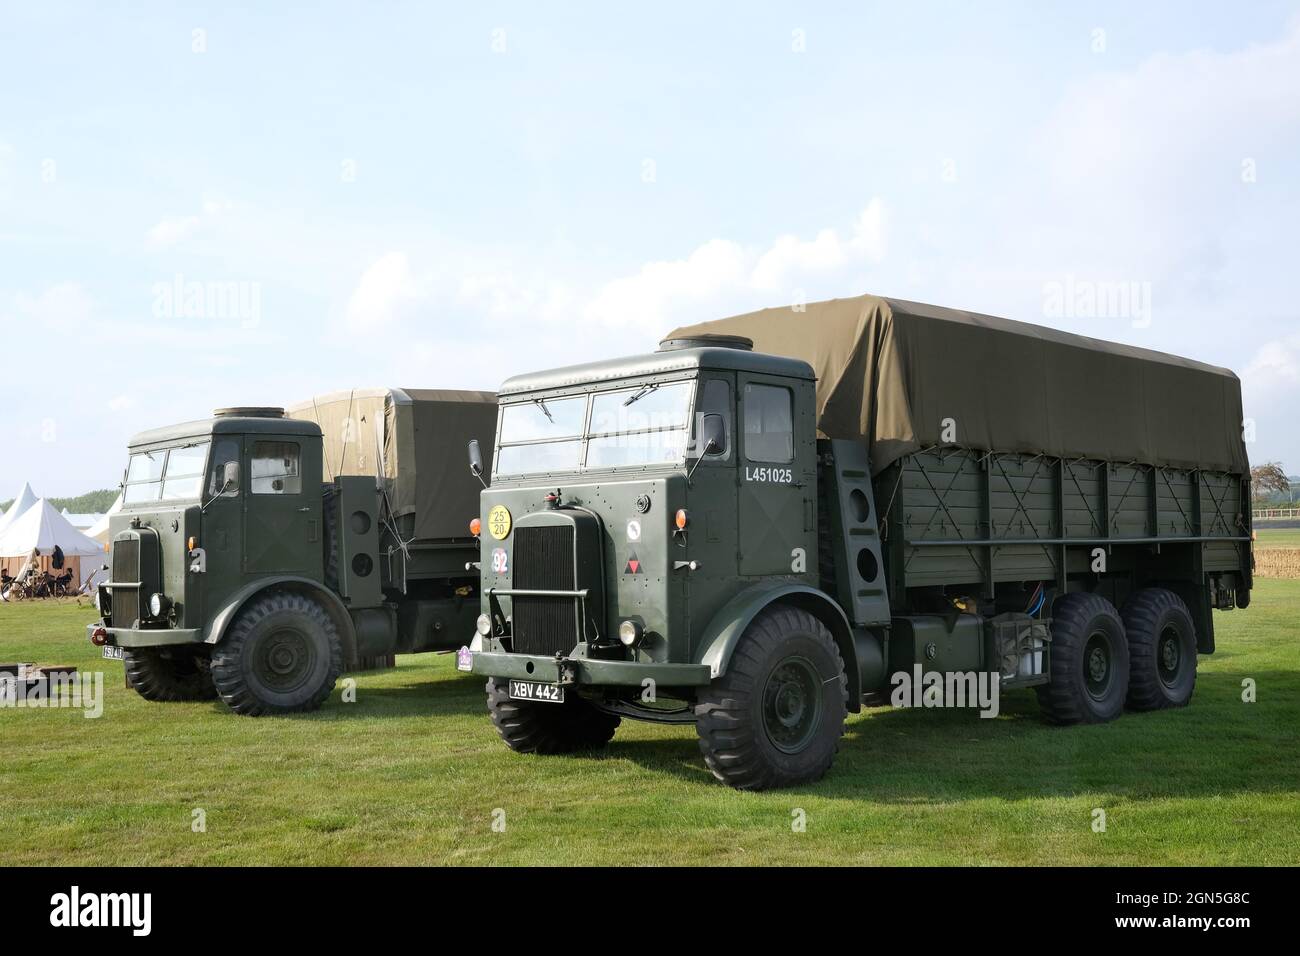 September 2021 - Leyland Hippo 2 Heavy British transport trucks Military display at The Goodwood Revival race meeting for vintage cars and motorbikes. Stock Photo